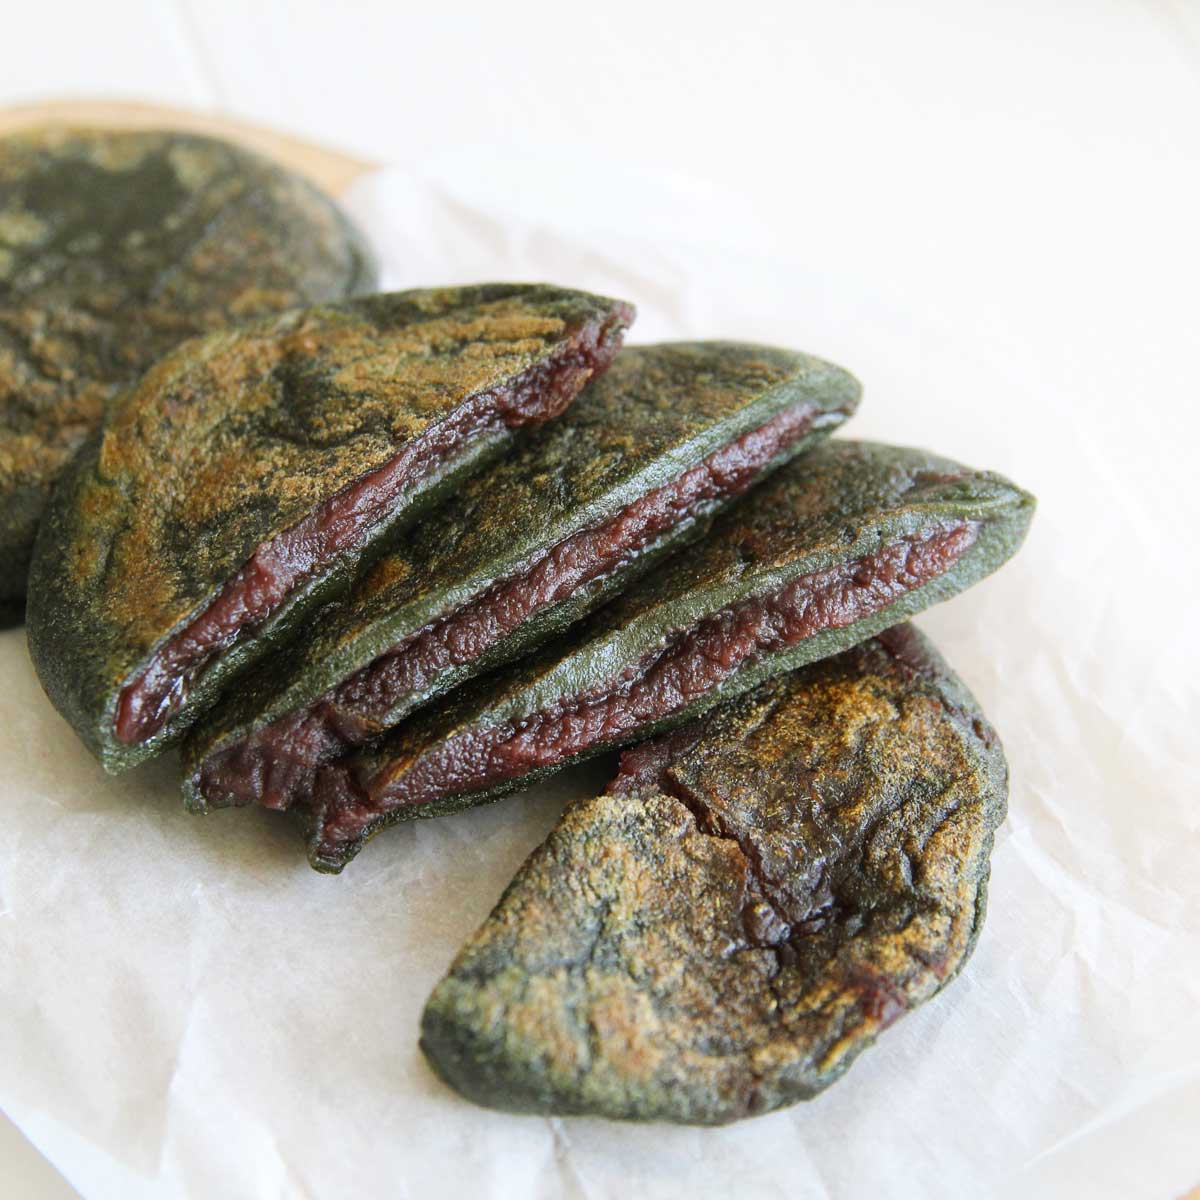 How to Make Mugwort Mochi Pancakes (Stuffed with Red Bean Paste) - Zucchini Flatbread